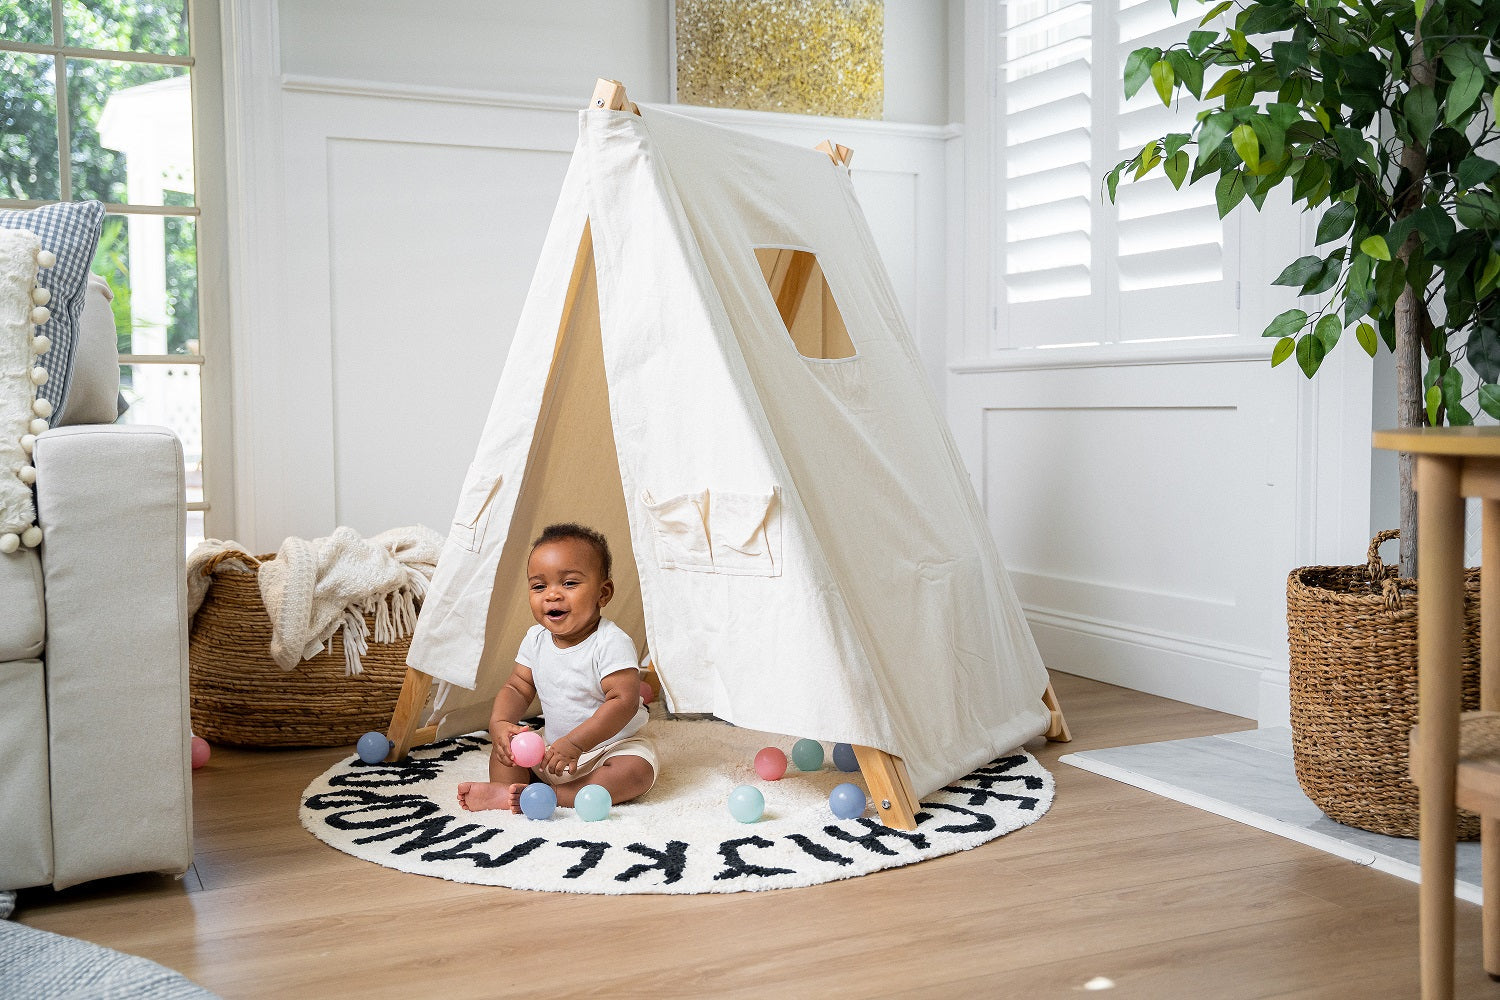 Tent Covering For Spruce - Baby and Toddler Foldable Swing Set - Swing Set Sold Separately